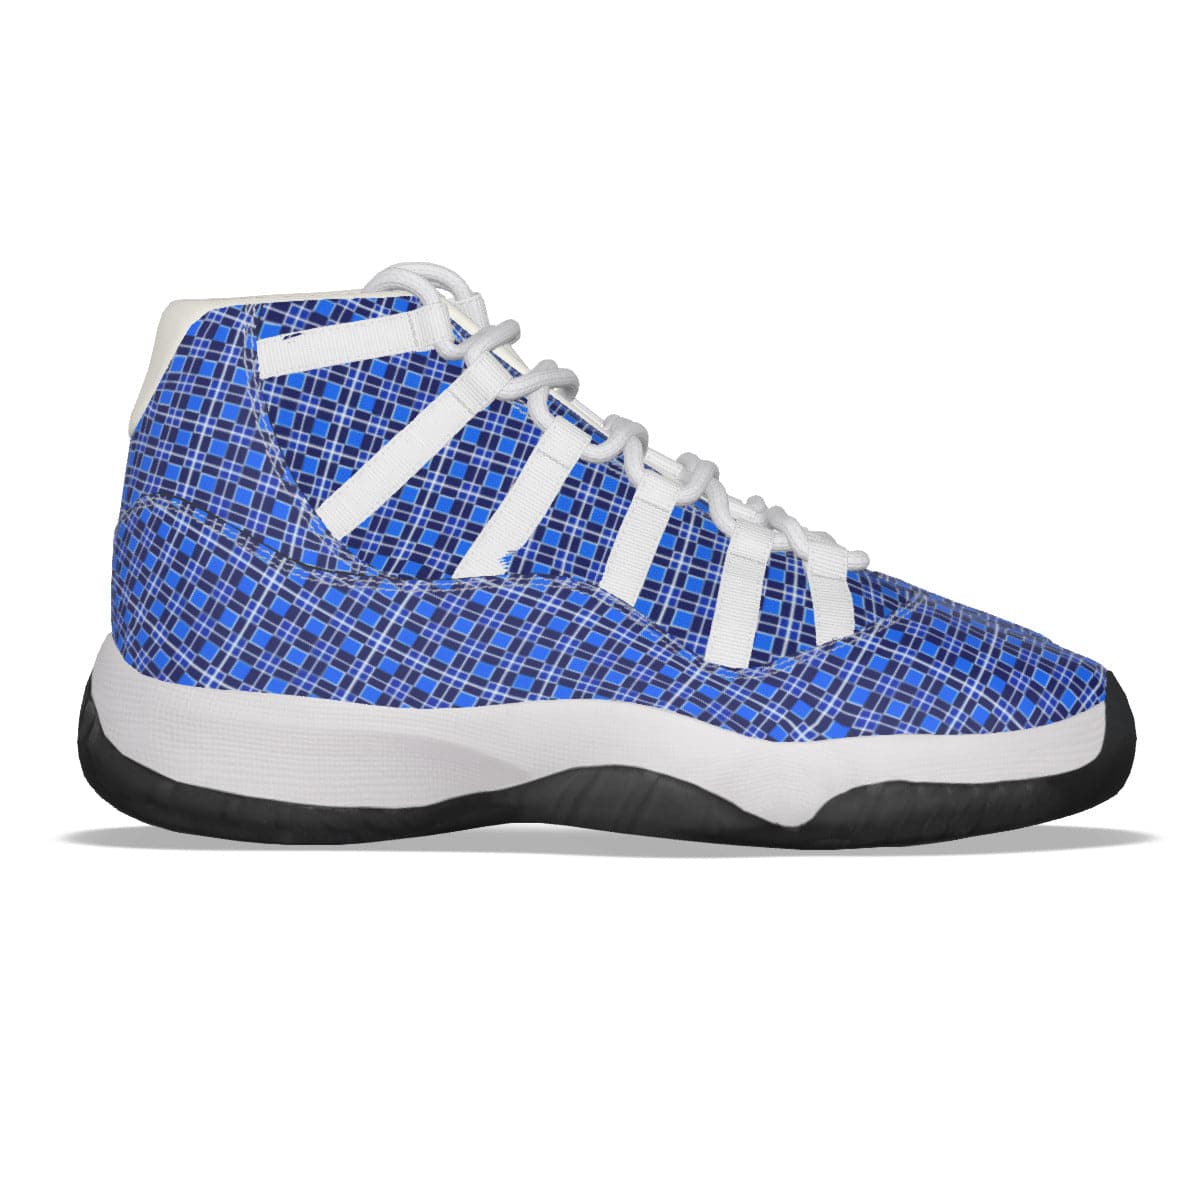 16 in the Blue Men's High Top Basketball Shoes by Sensus Studio Design